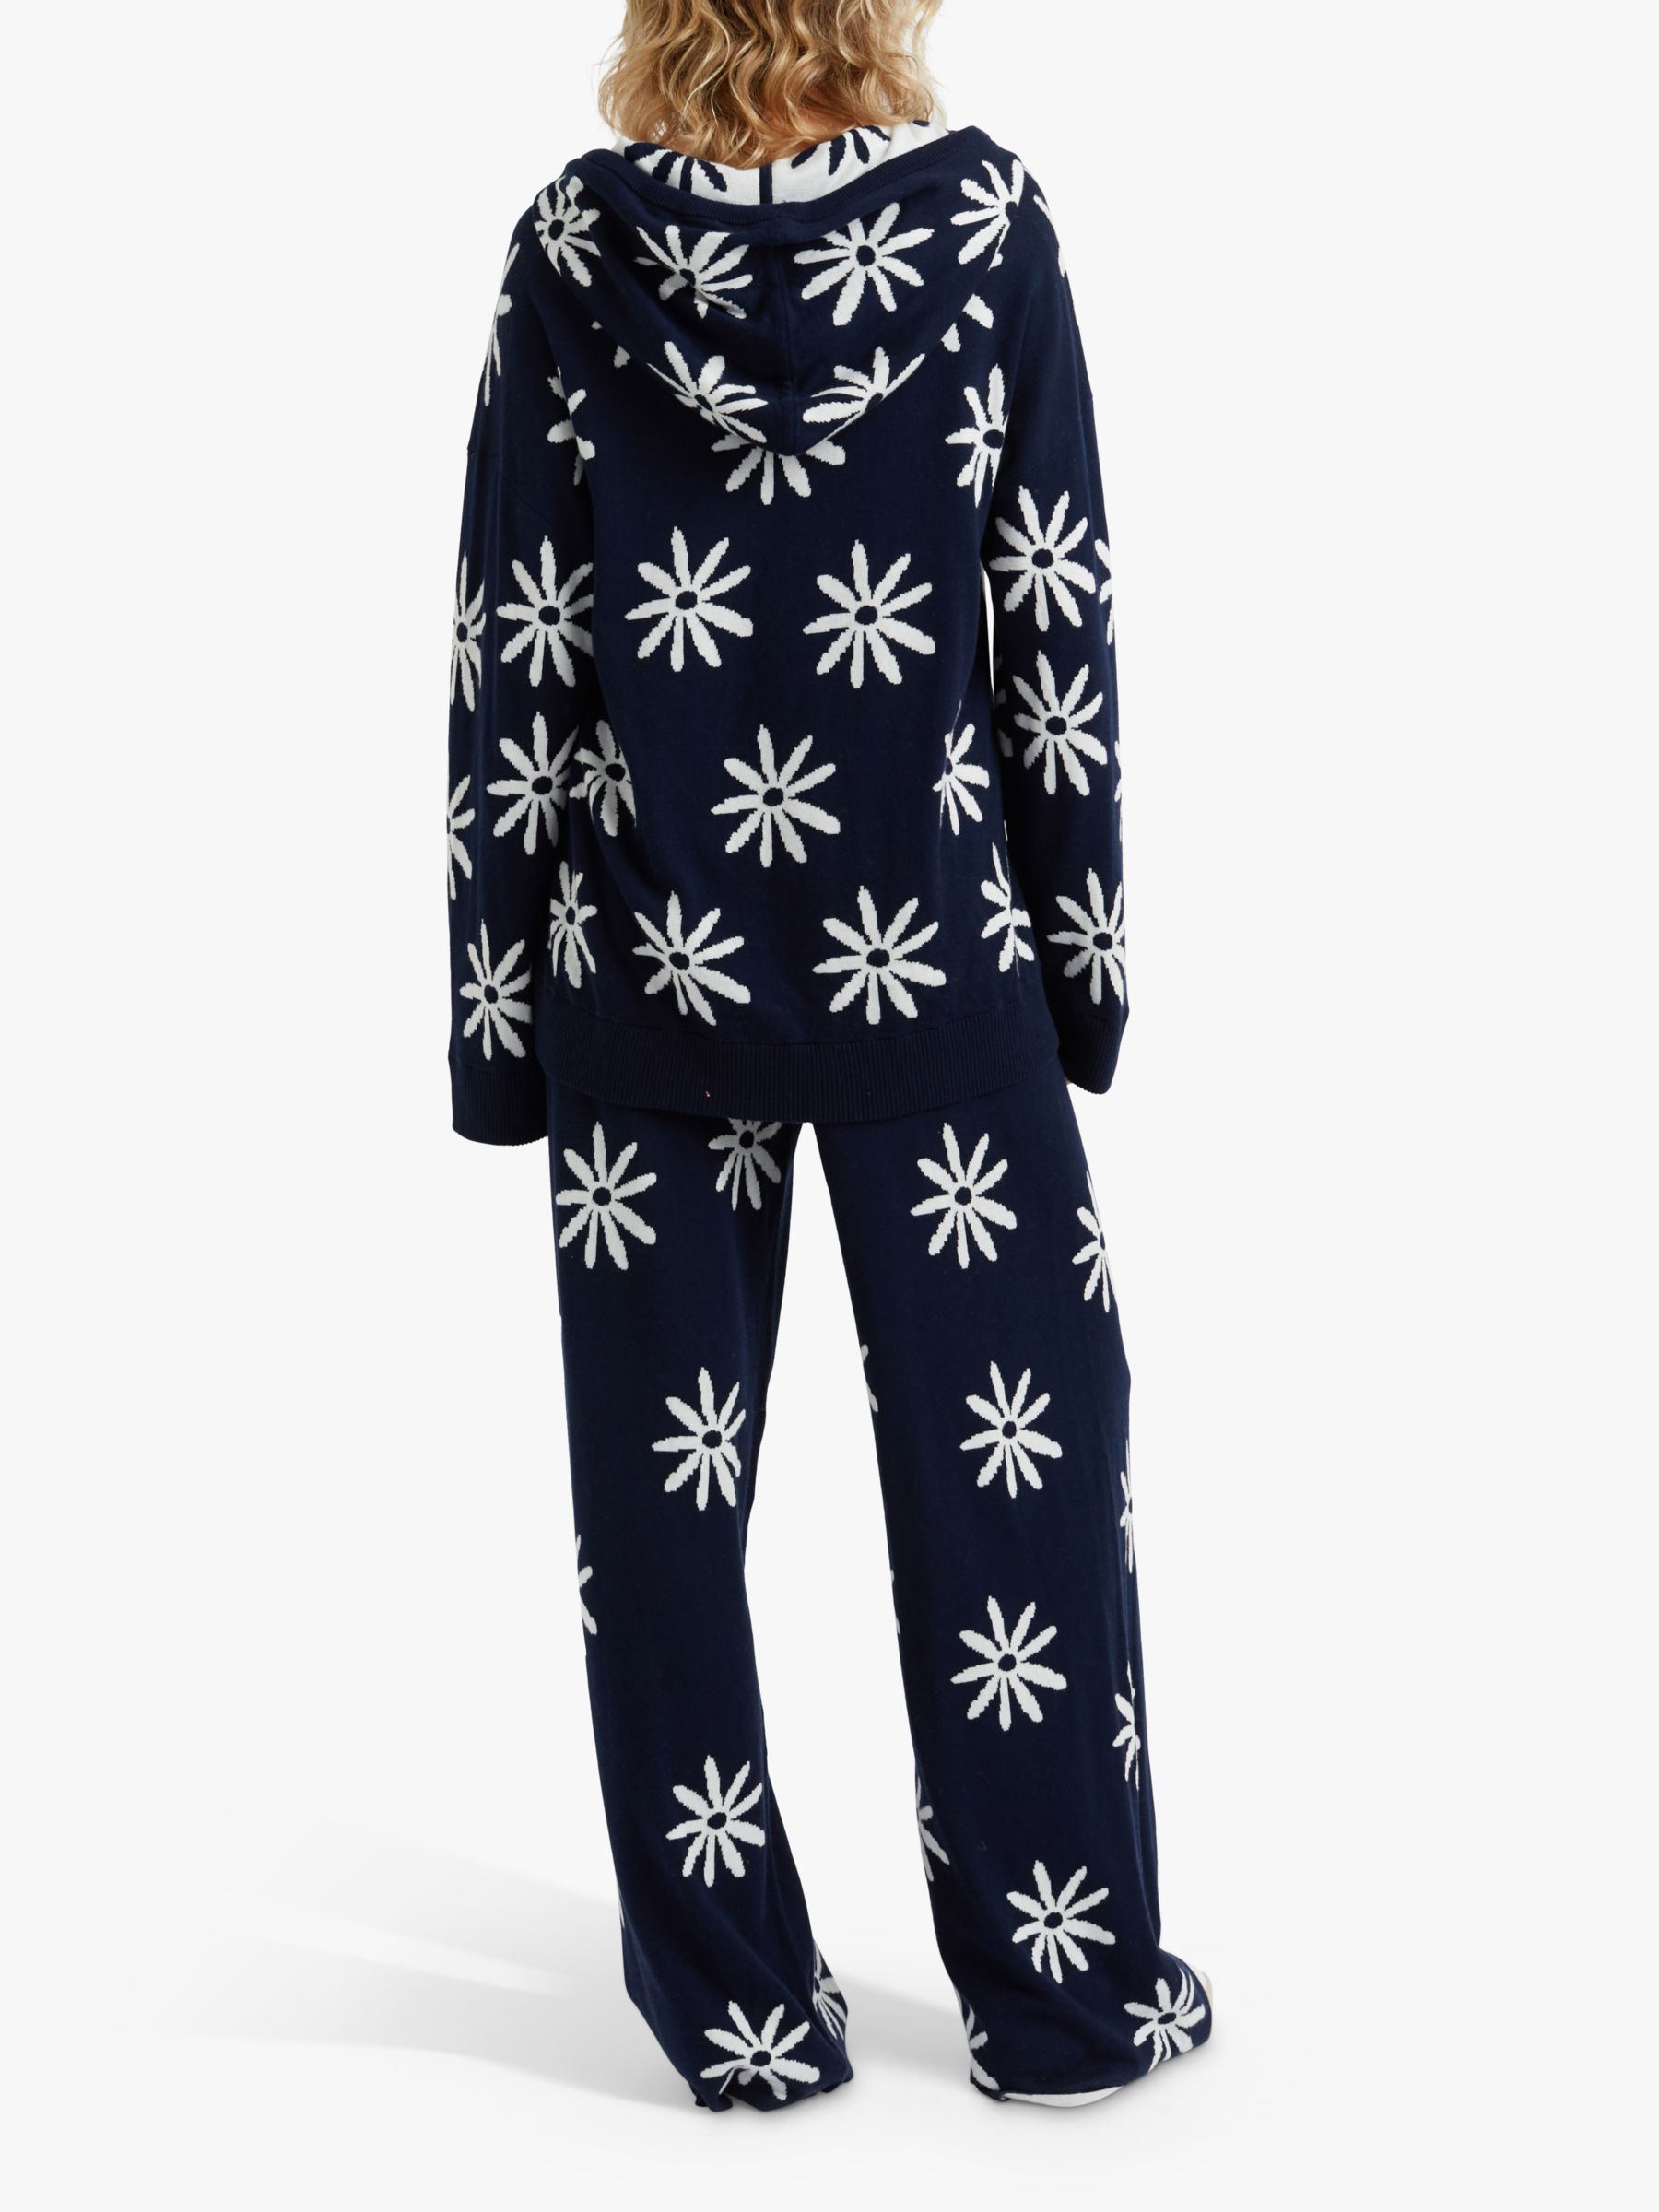 Buy Chinti & Parker Ditsy Daisy Cashmere Blend Hoodie, Deep Navy/Multi Online at johnlewis.com